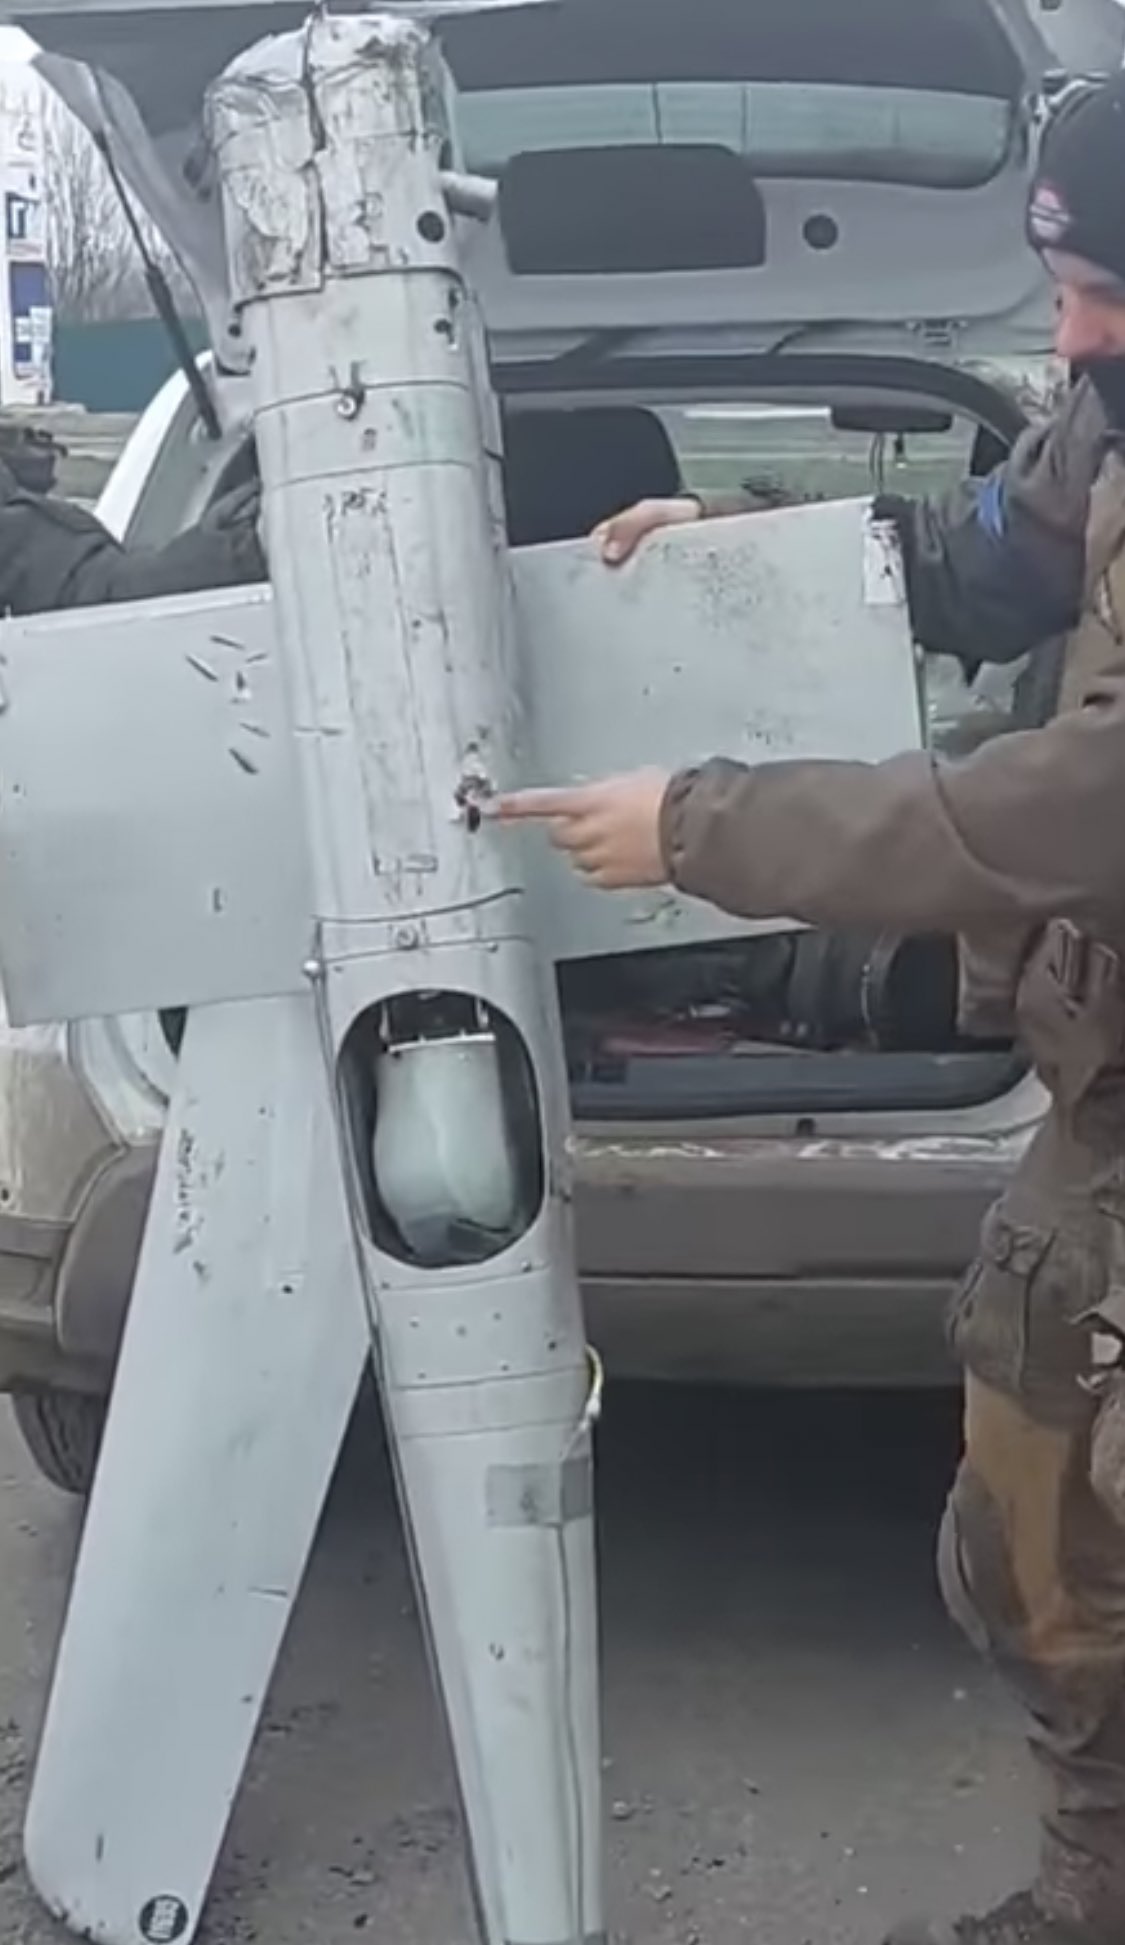 Ukrainian forces downed another Orlan-10 reconnaissance UAV, Defense Express